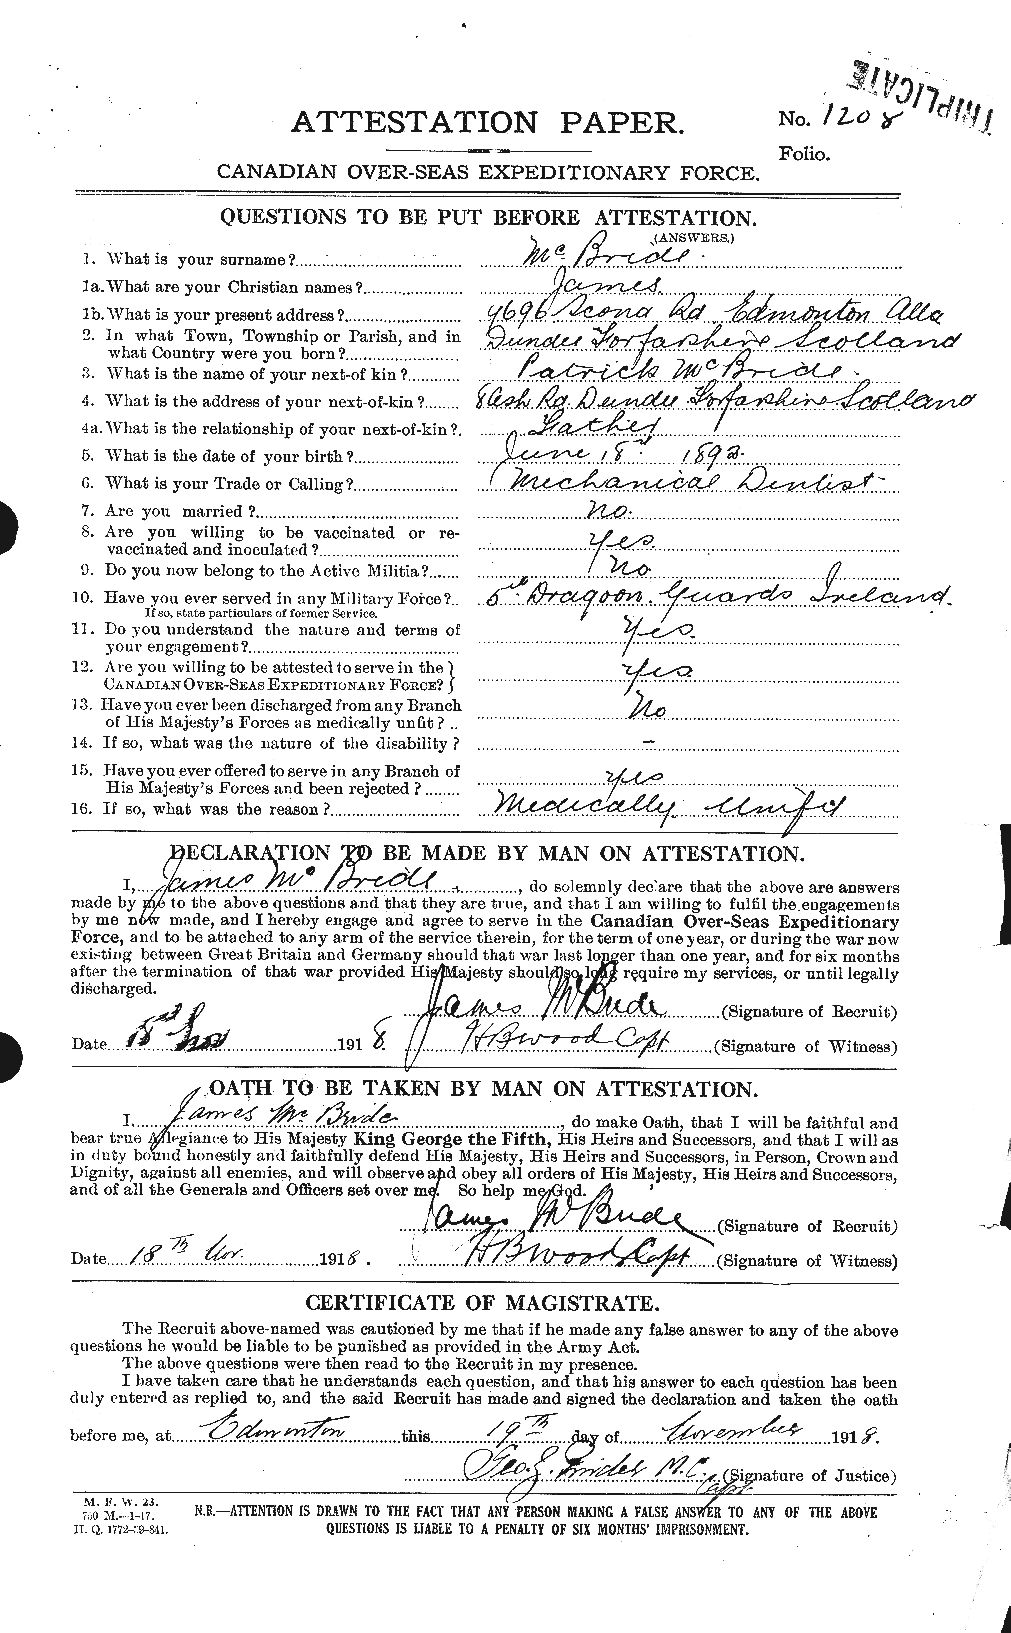 Personnel Records of the First World War - CEF 131806a